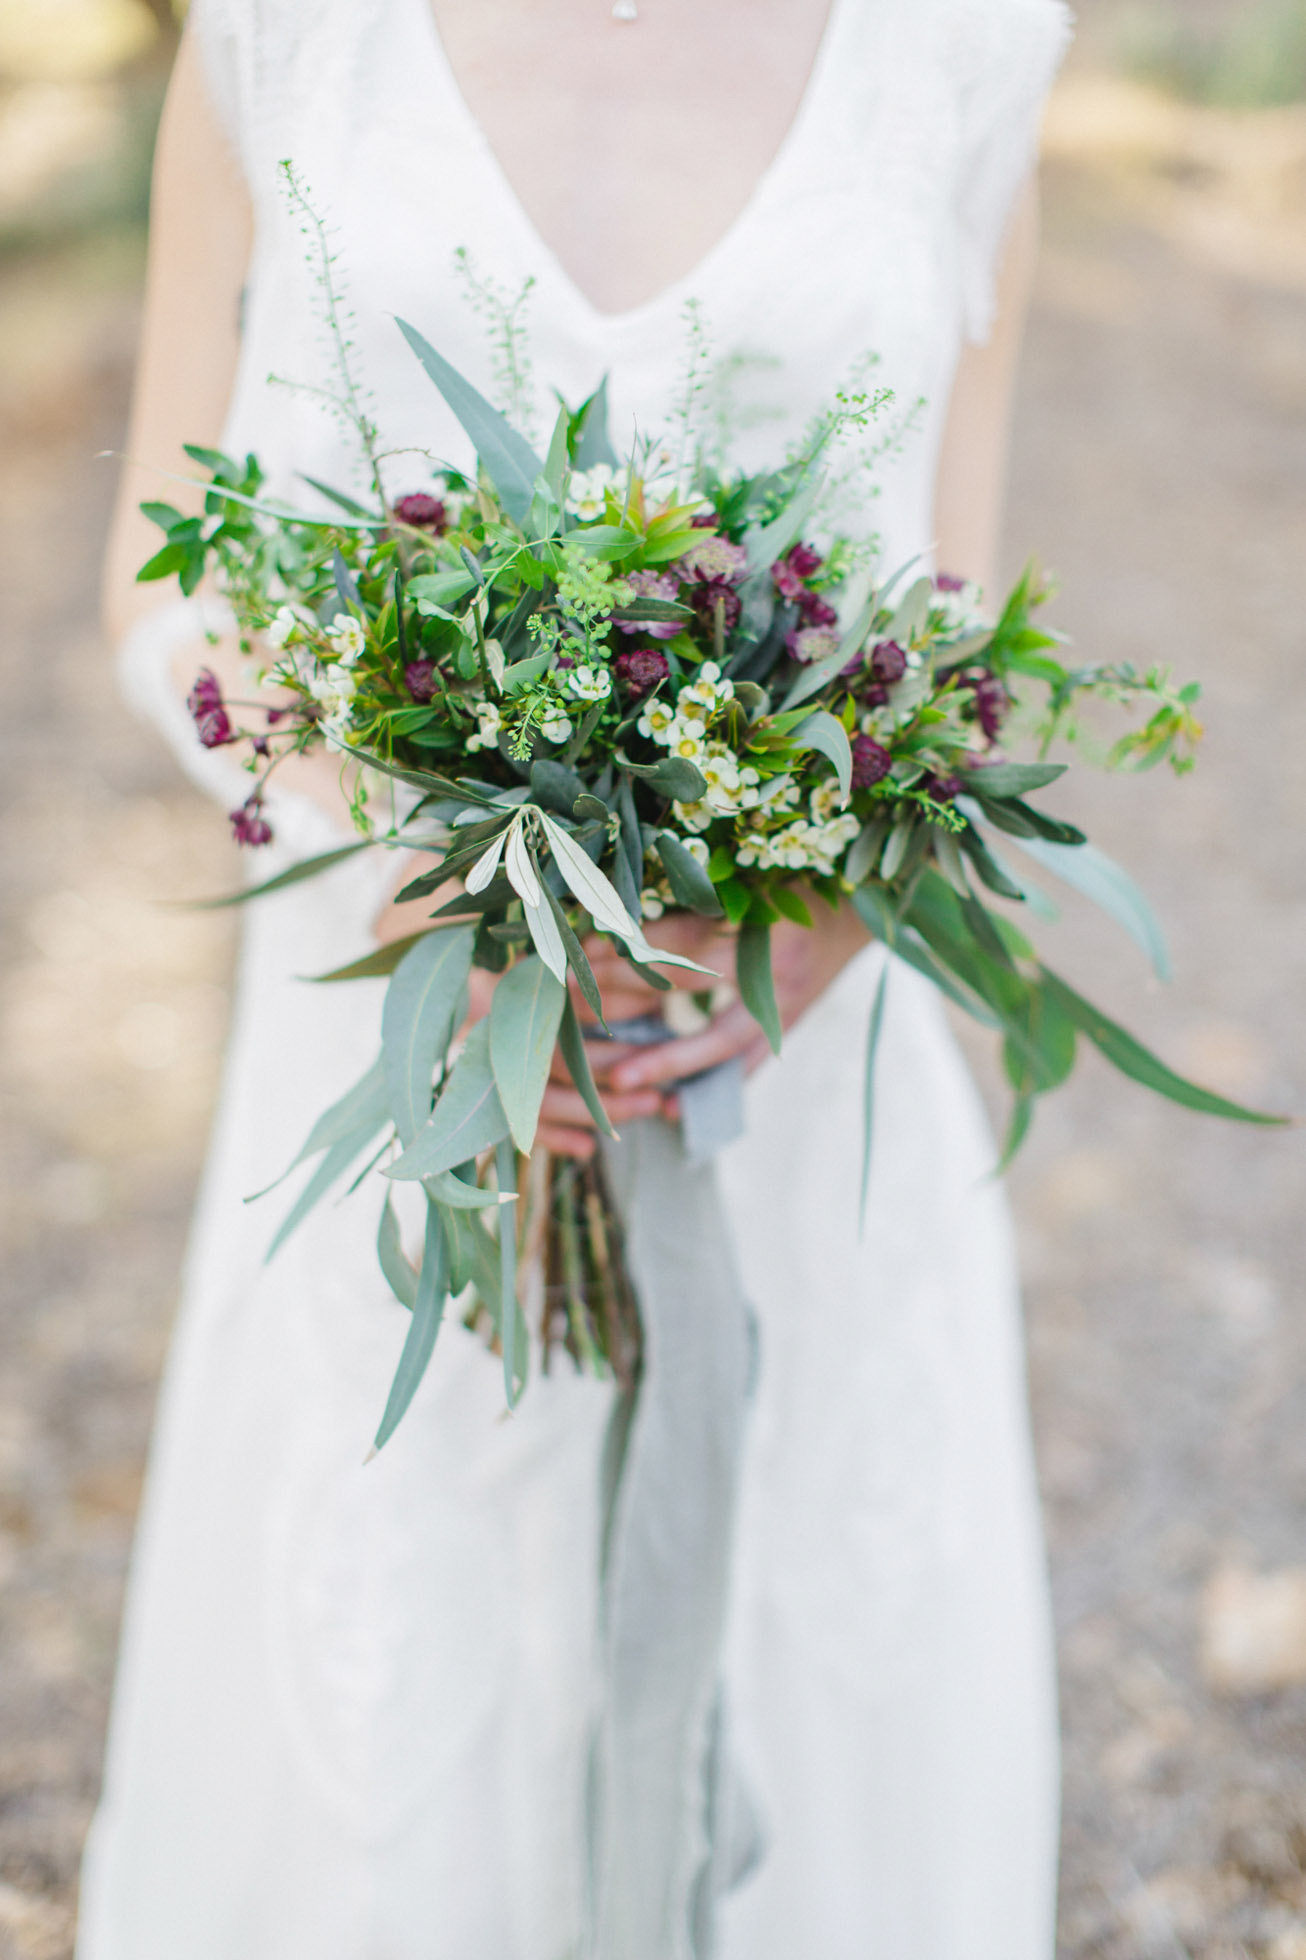 Bridal flower bouquet styled and photographed on the inspiration wedding session in Athens.